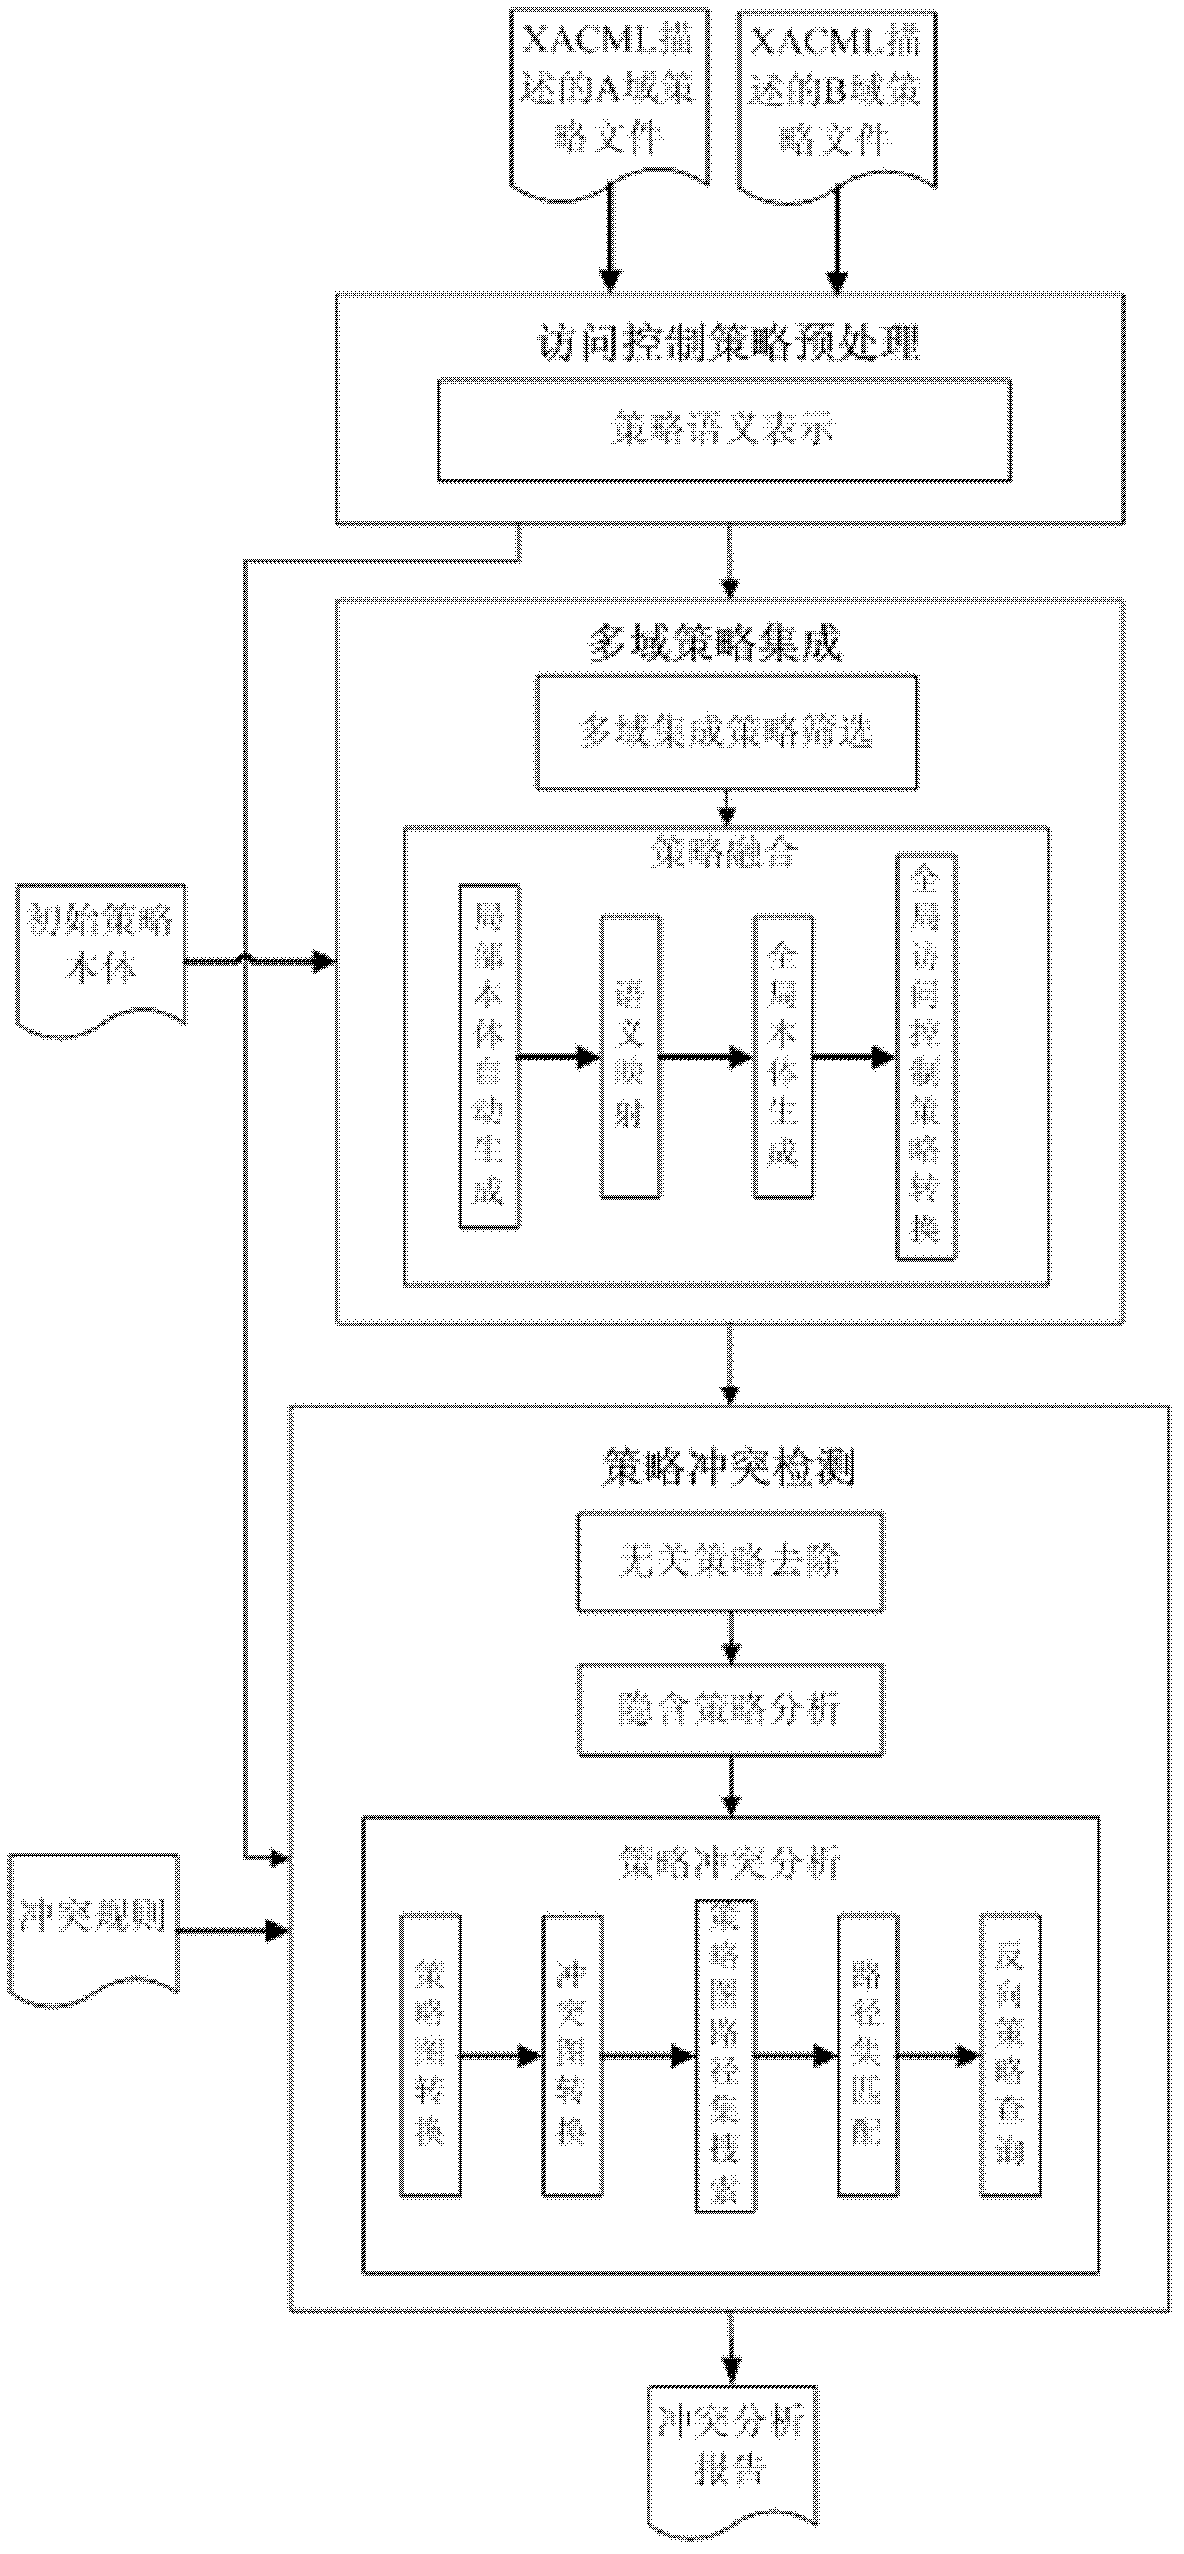 System and method for detecting access control strategy collision in collaborative environment